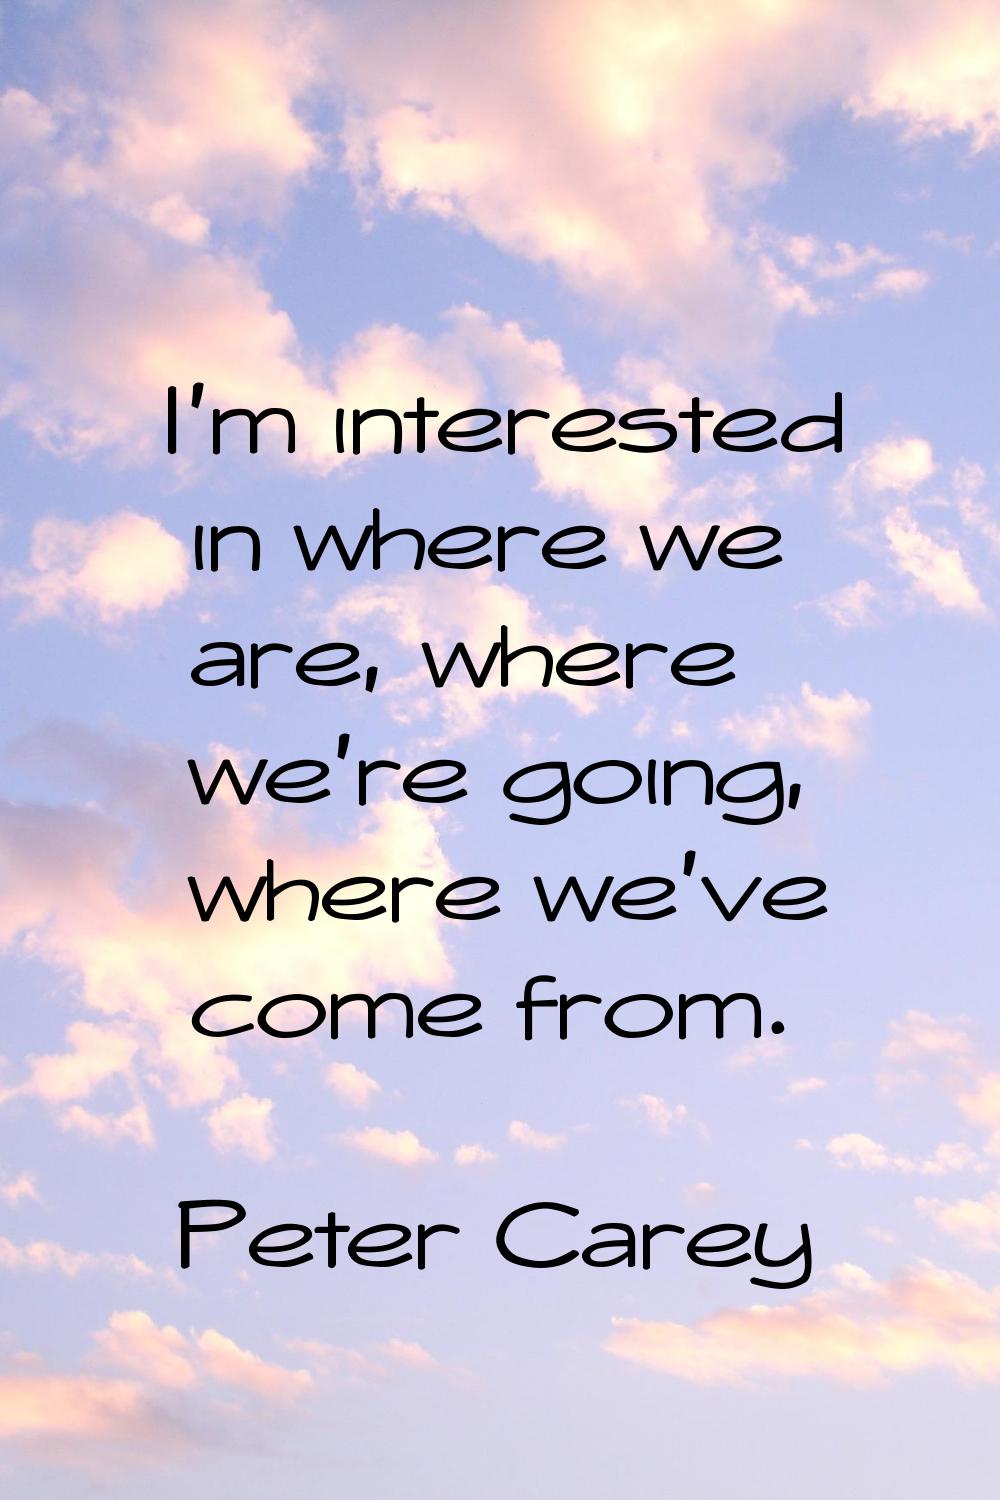 I'm interested in where we are, where we're going, where we've come from.